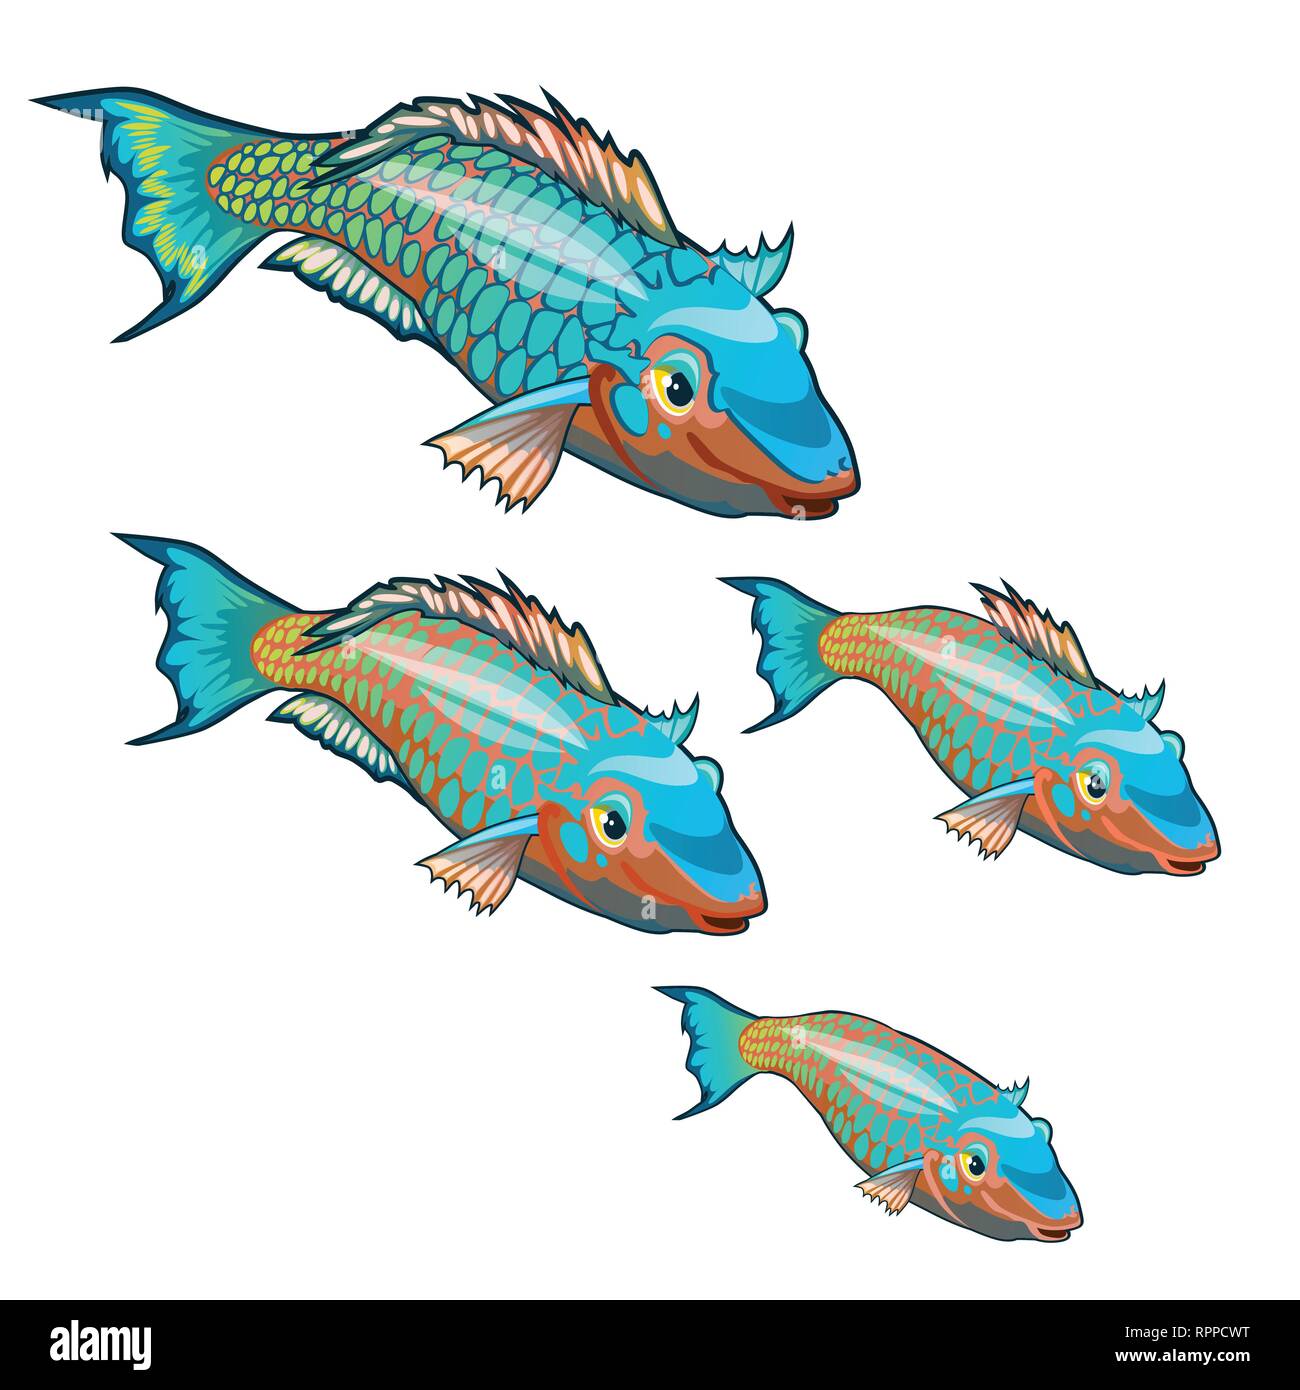 The growth stage of fancy fish with colorful scales isolated on a white background. Cartoon vector close-up illustration. Stock Vector